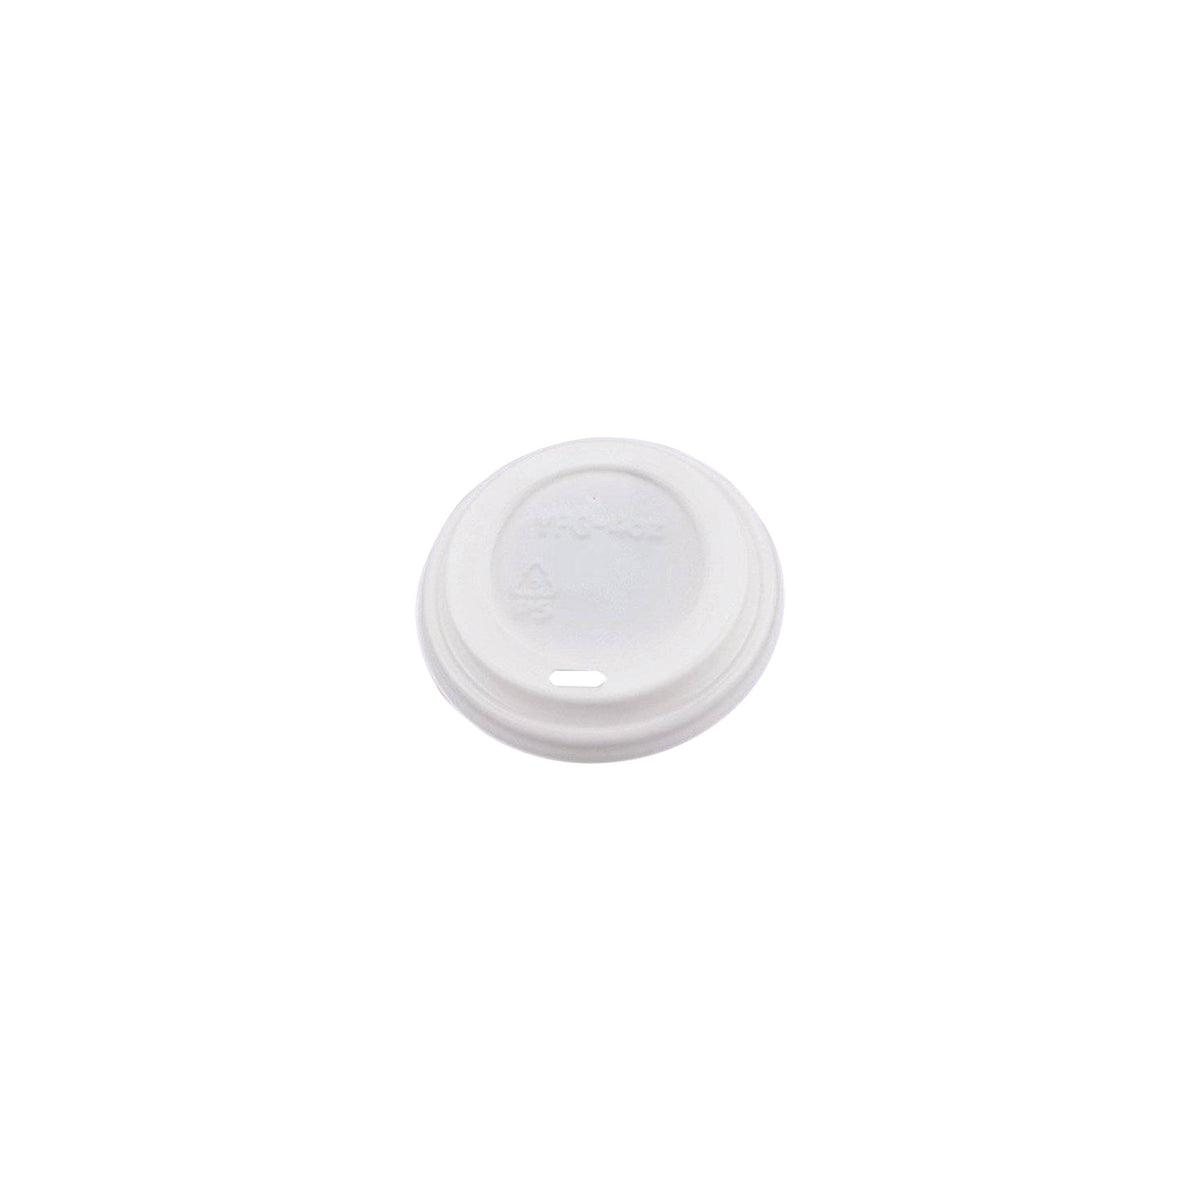 4 Oz White Lids for Paper Cups 1000 Pieces - Hotpack Global